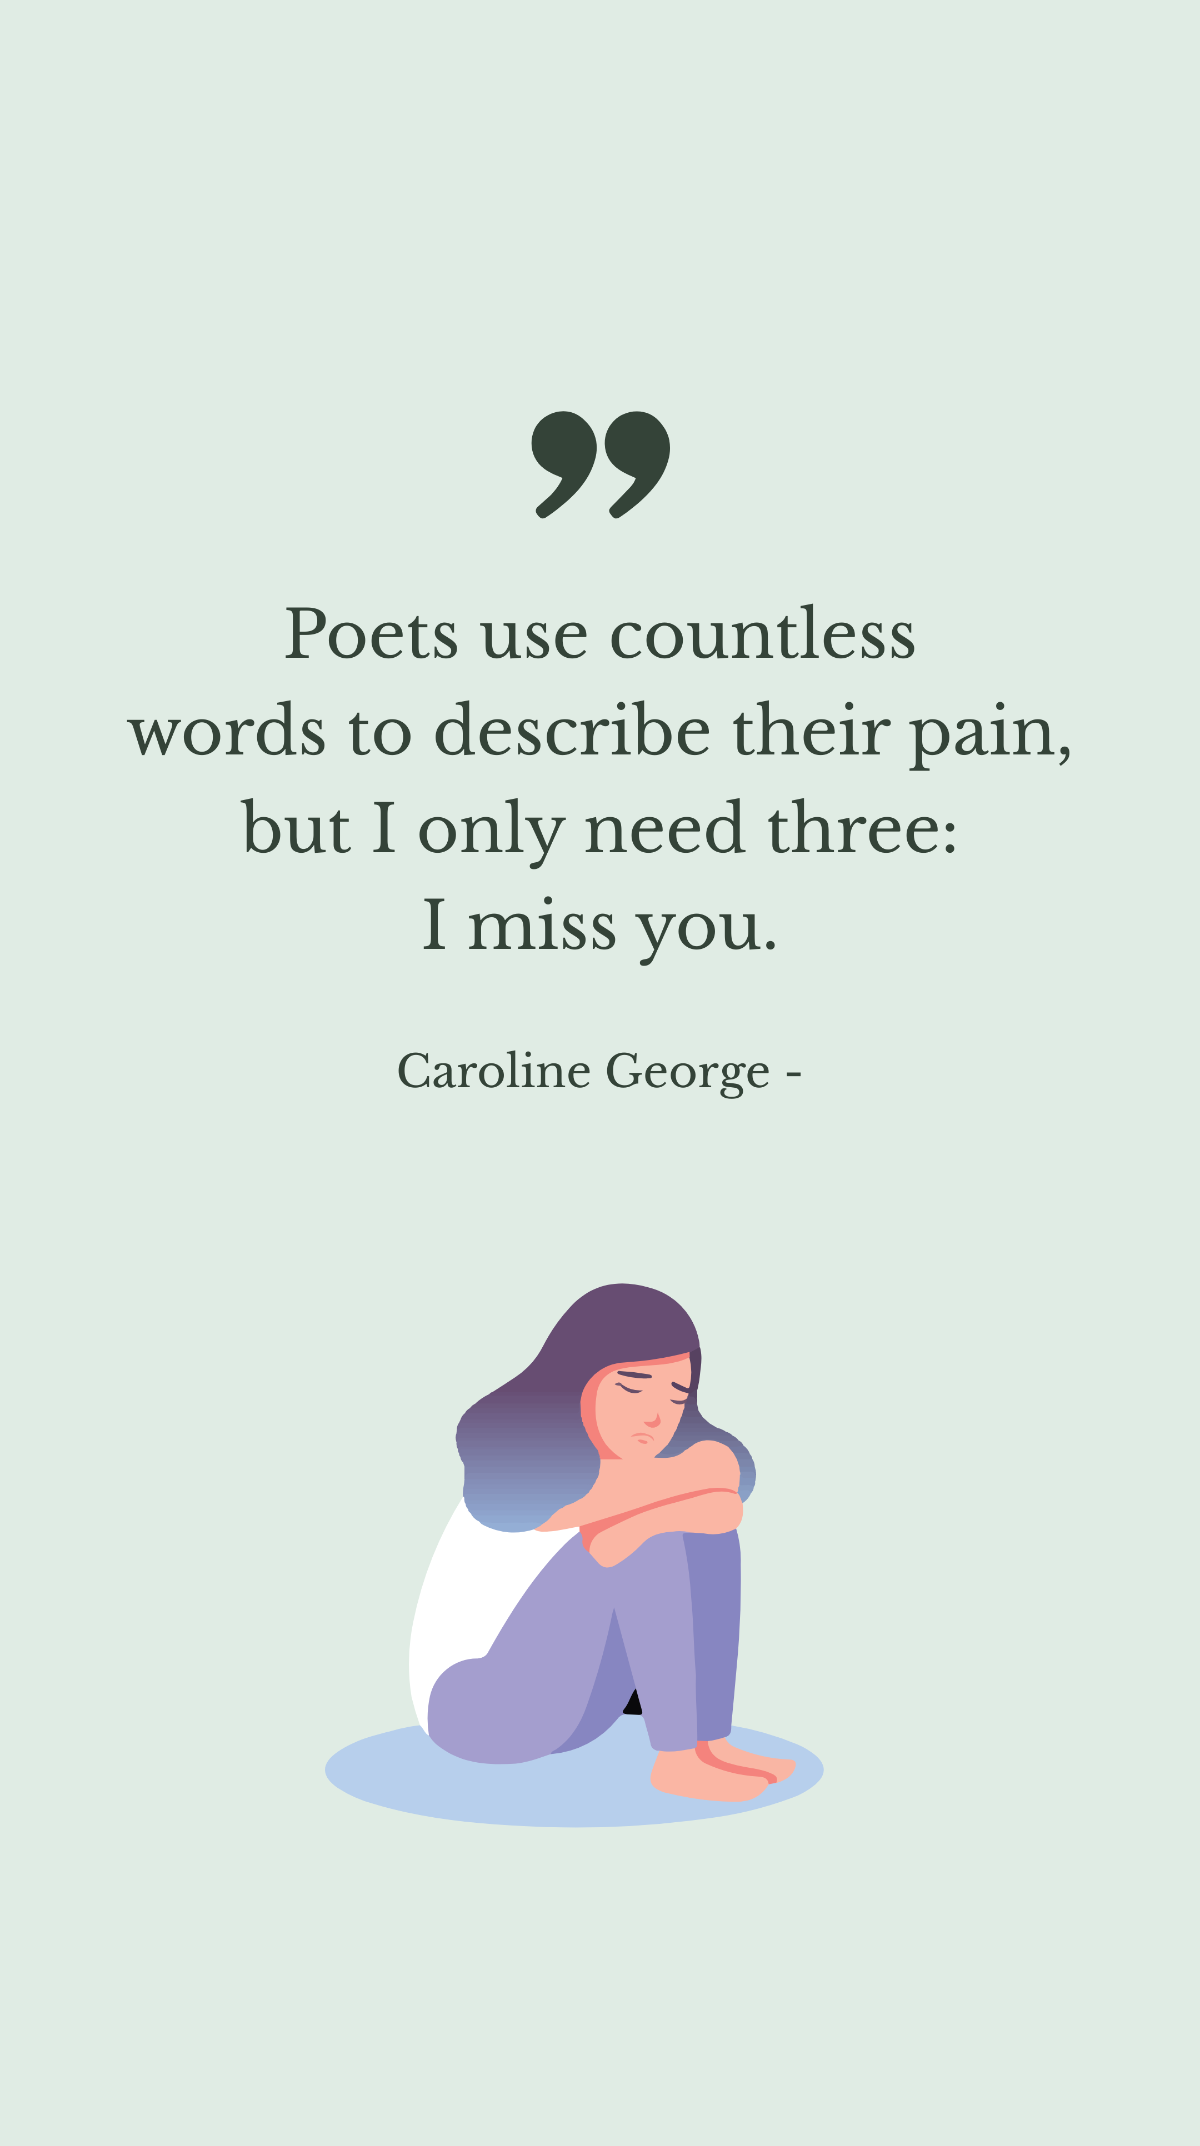 Free Caroline George - Poets use countless words to describe their pain, but I only need three: I miss you. Template